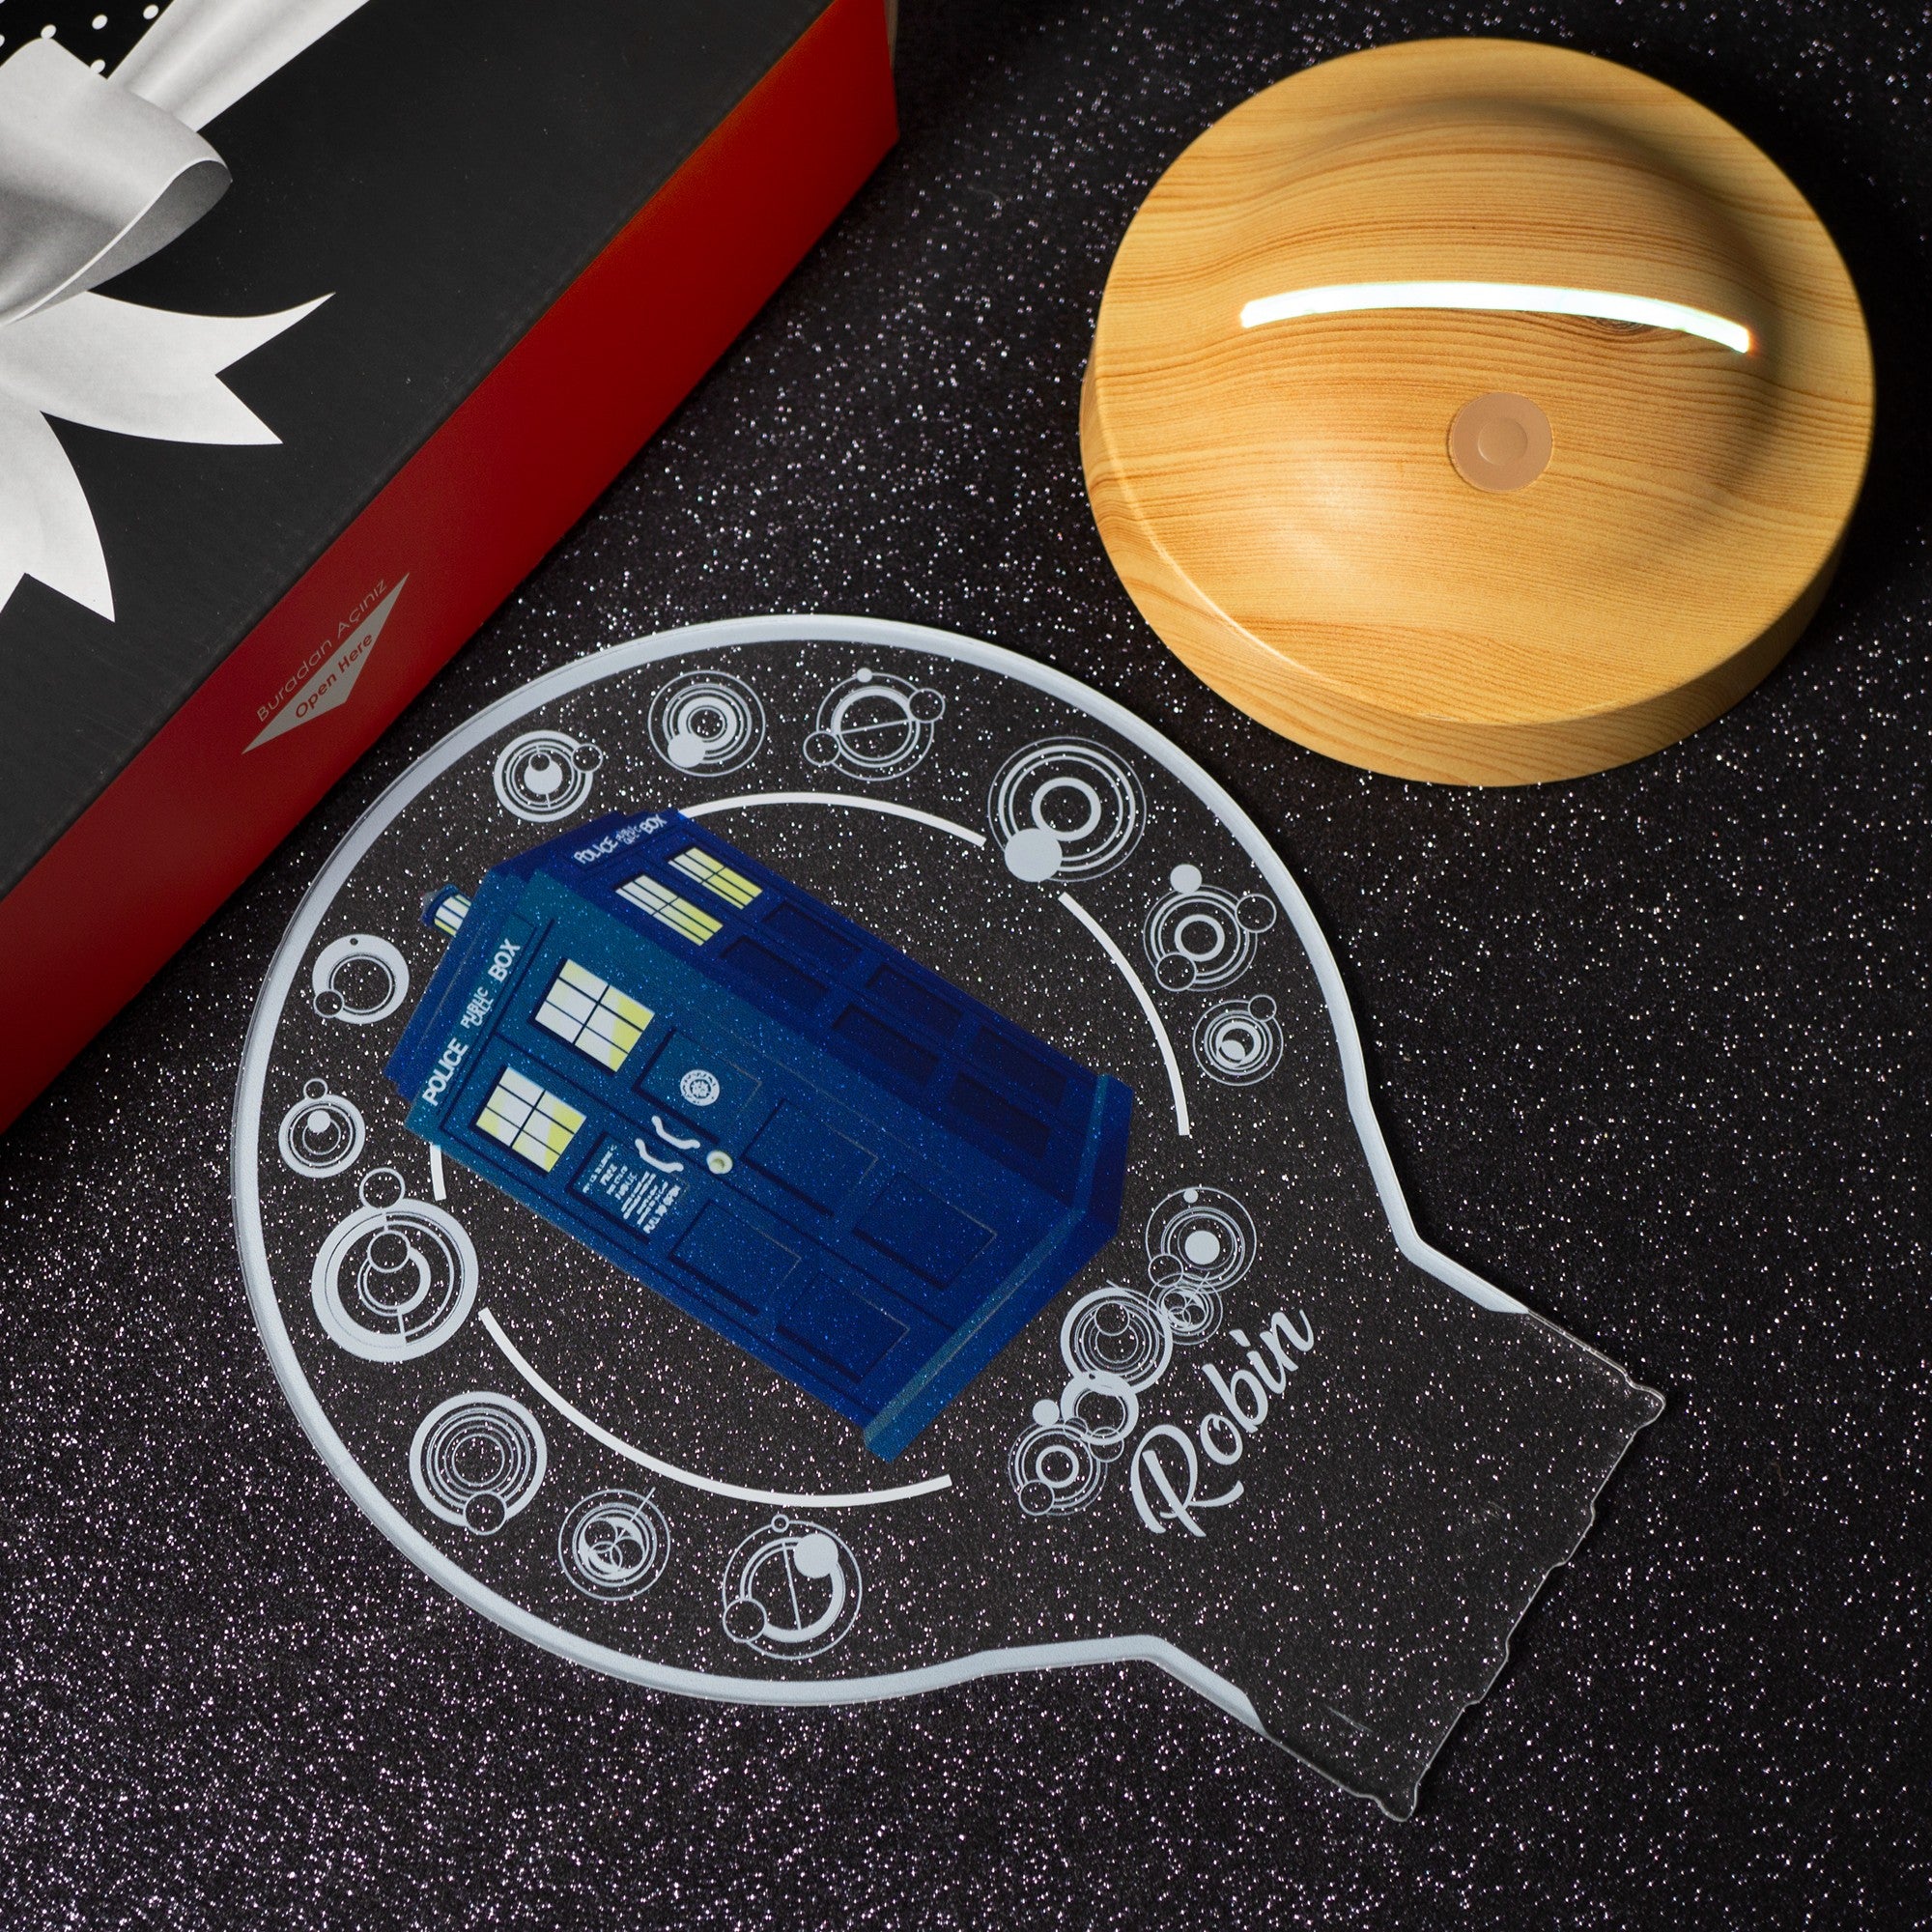 DR WHO TARDIS PERSONALISIERTE 3D LAMPE MIT WUNSCHNAME